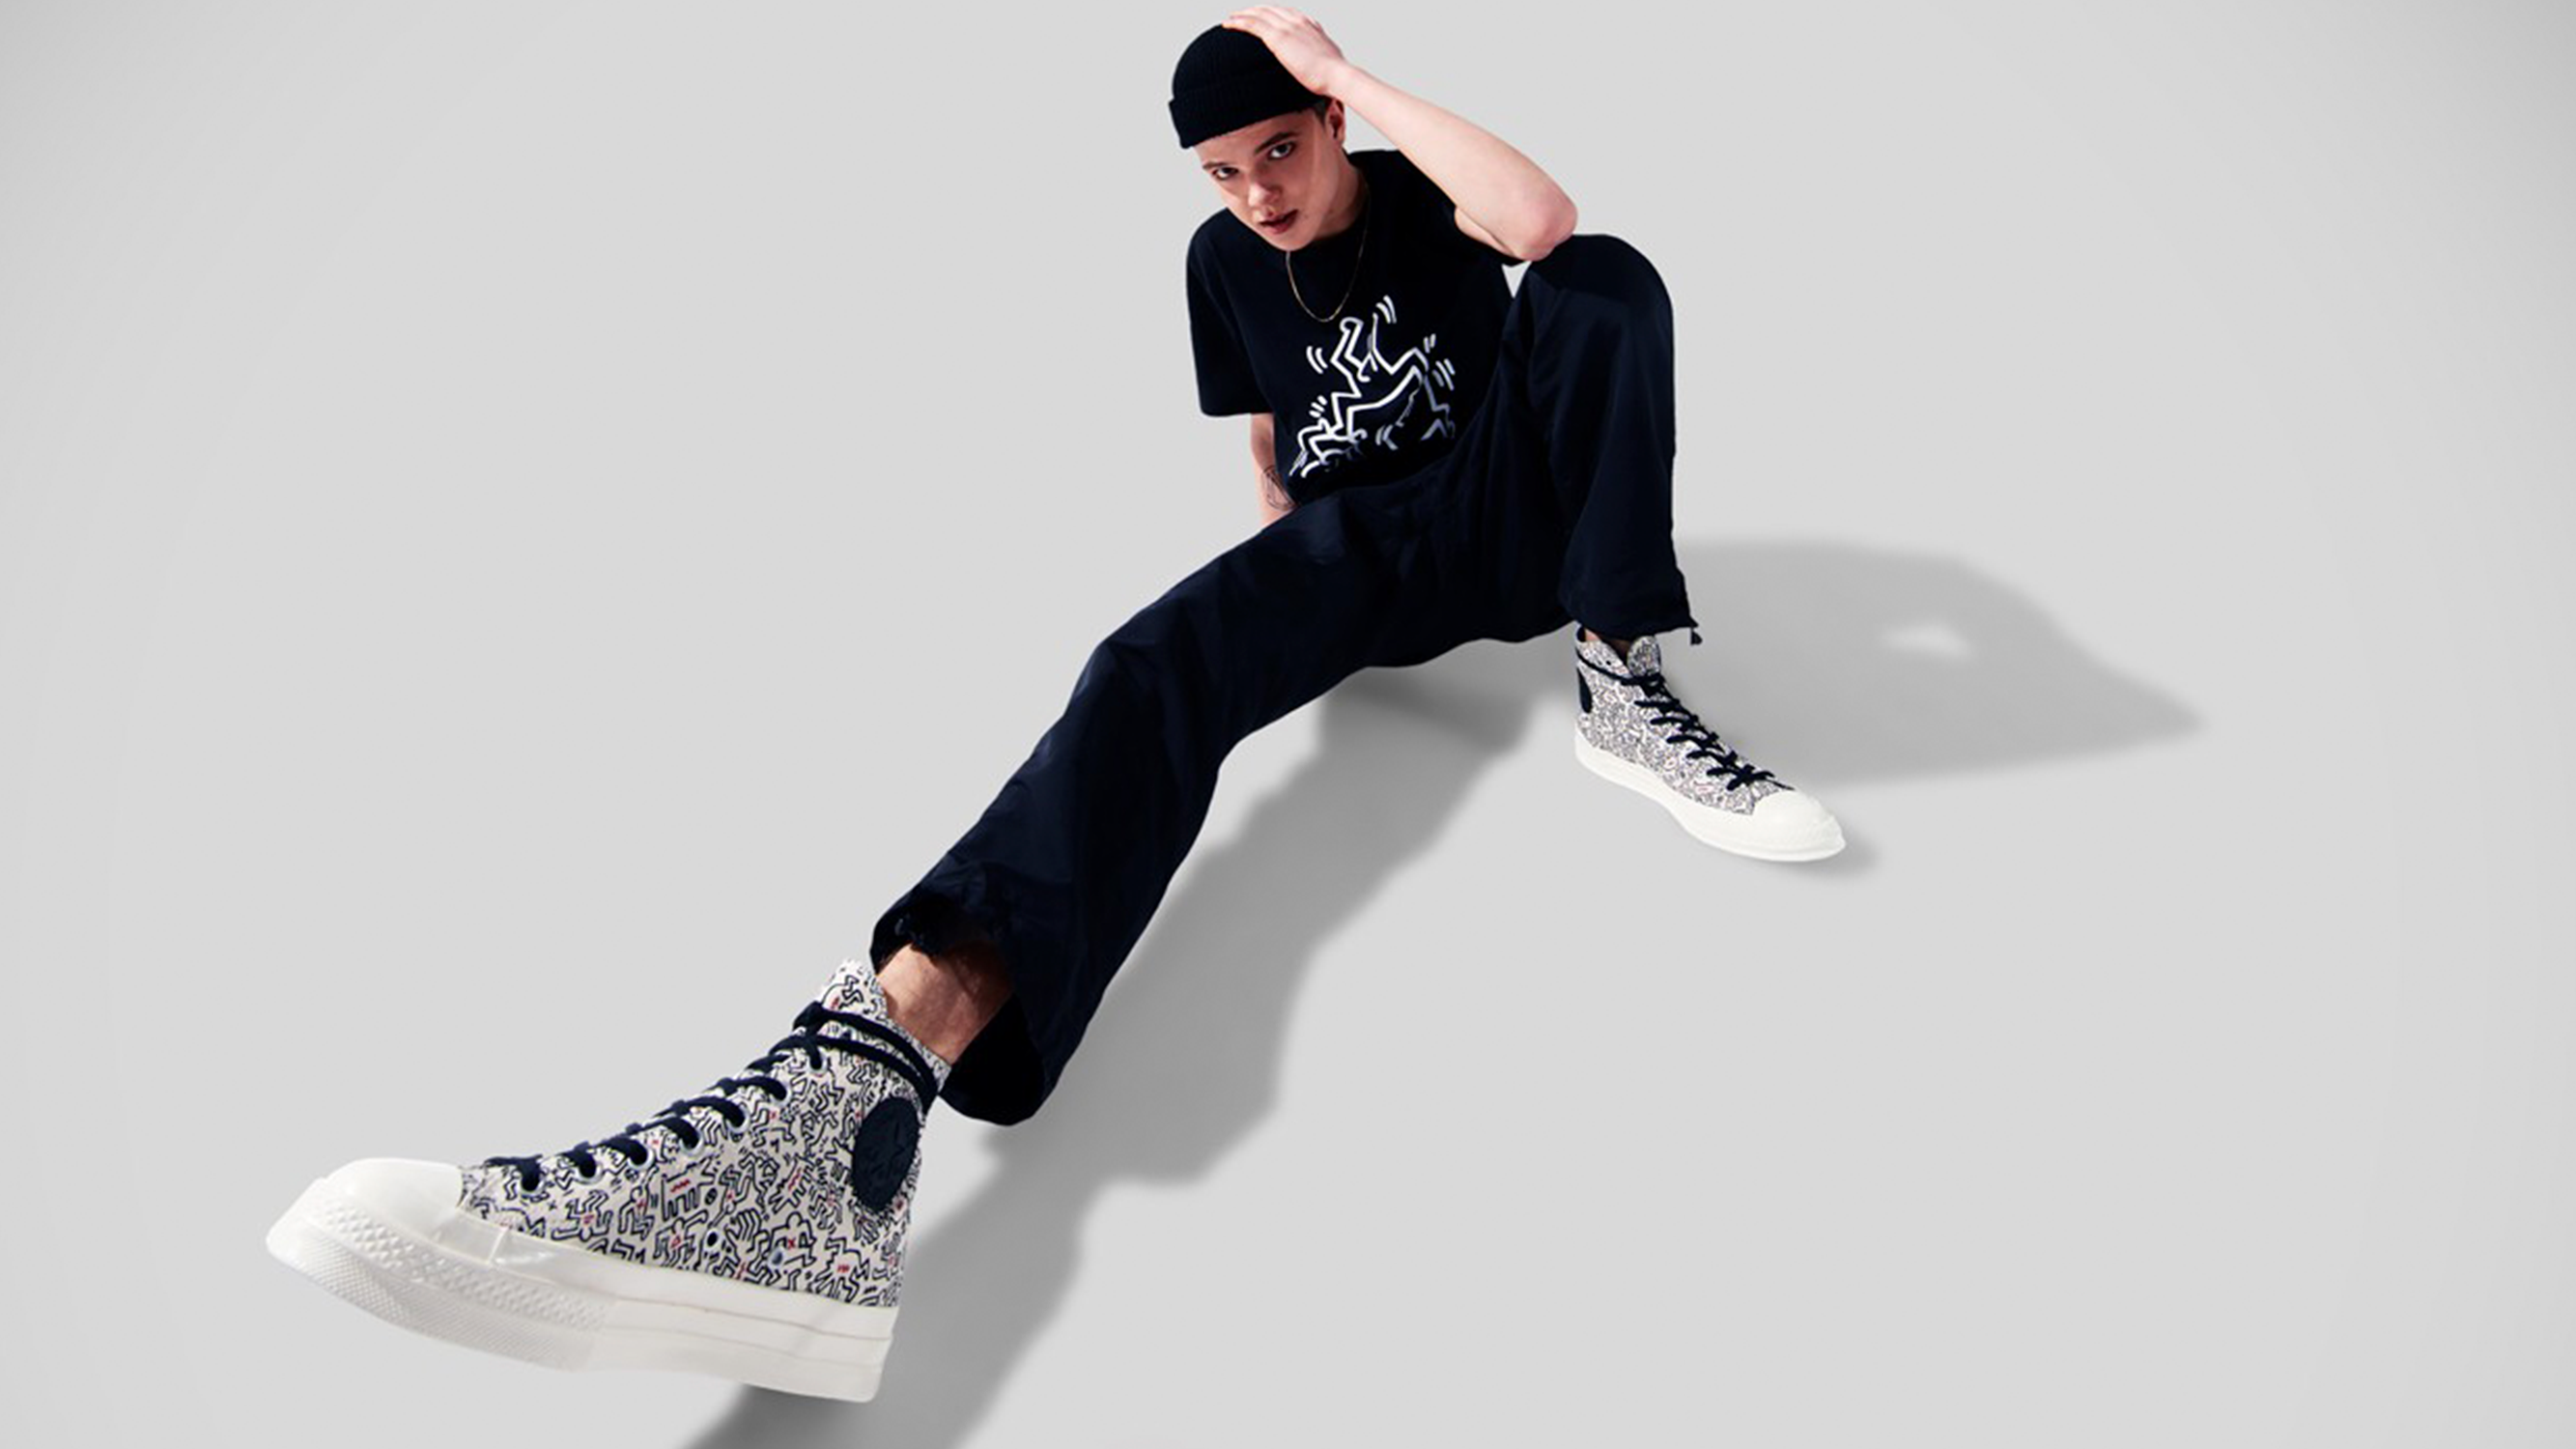 Keith Haring x Converse Channel 80s Vibes With This Collection of ...